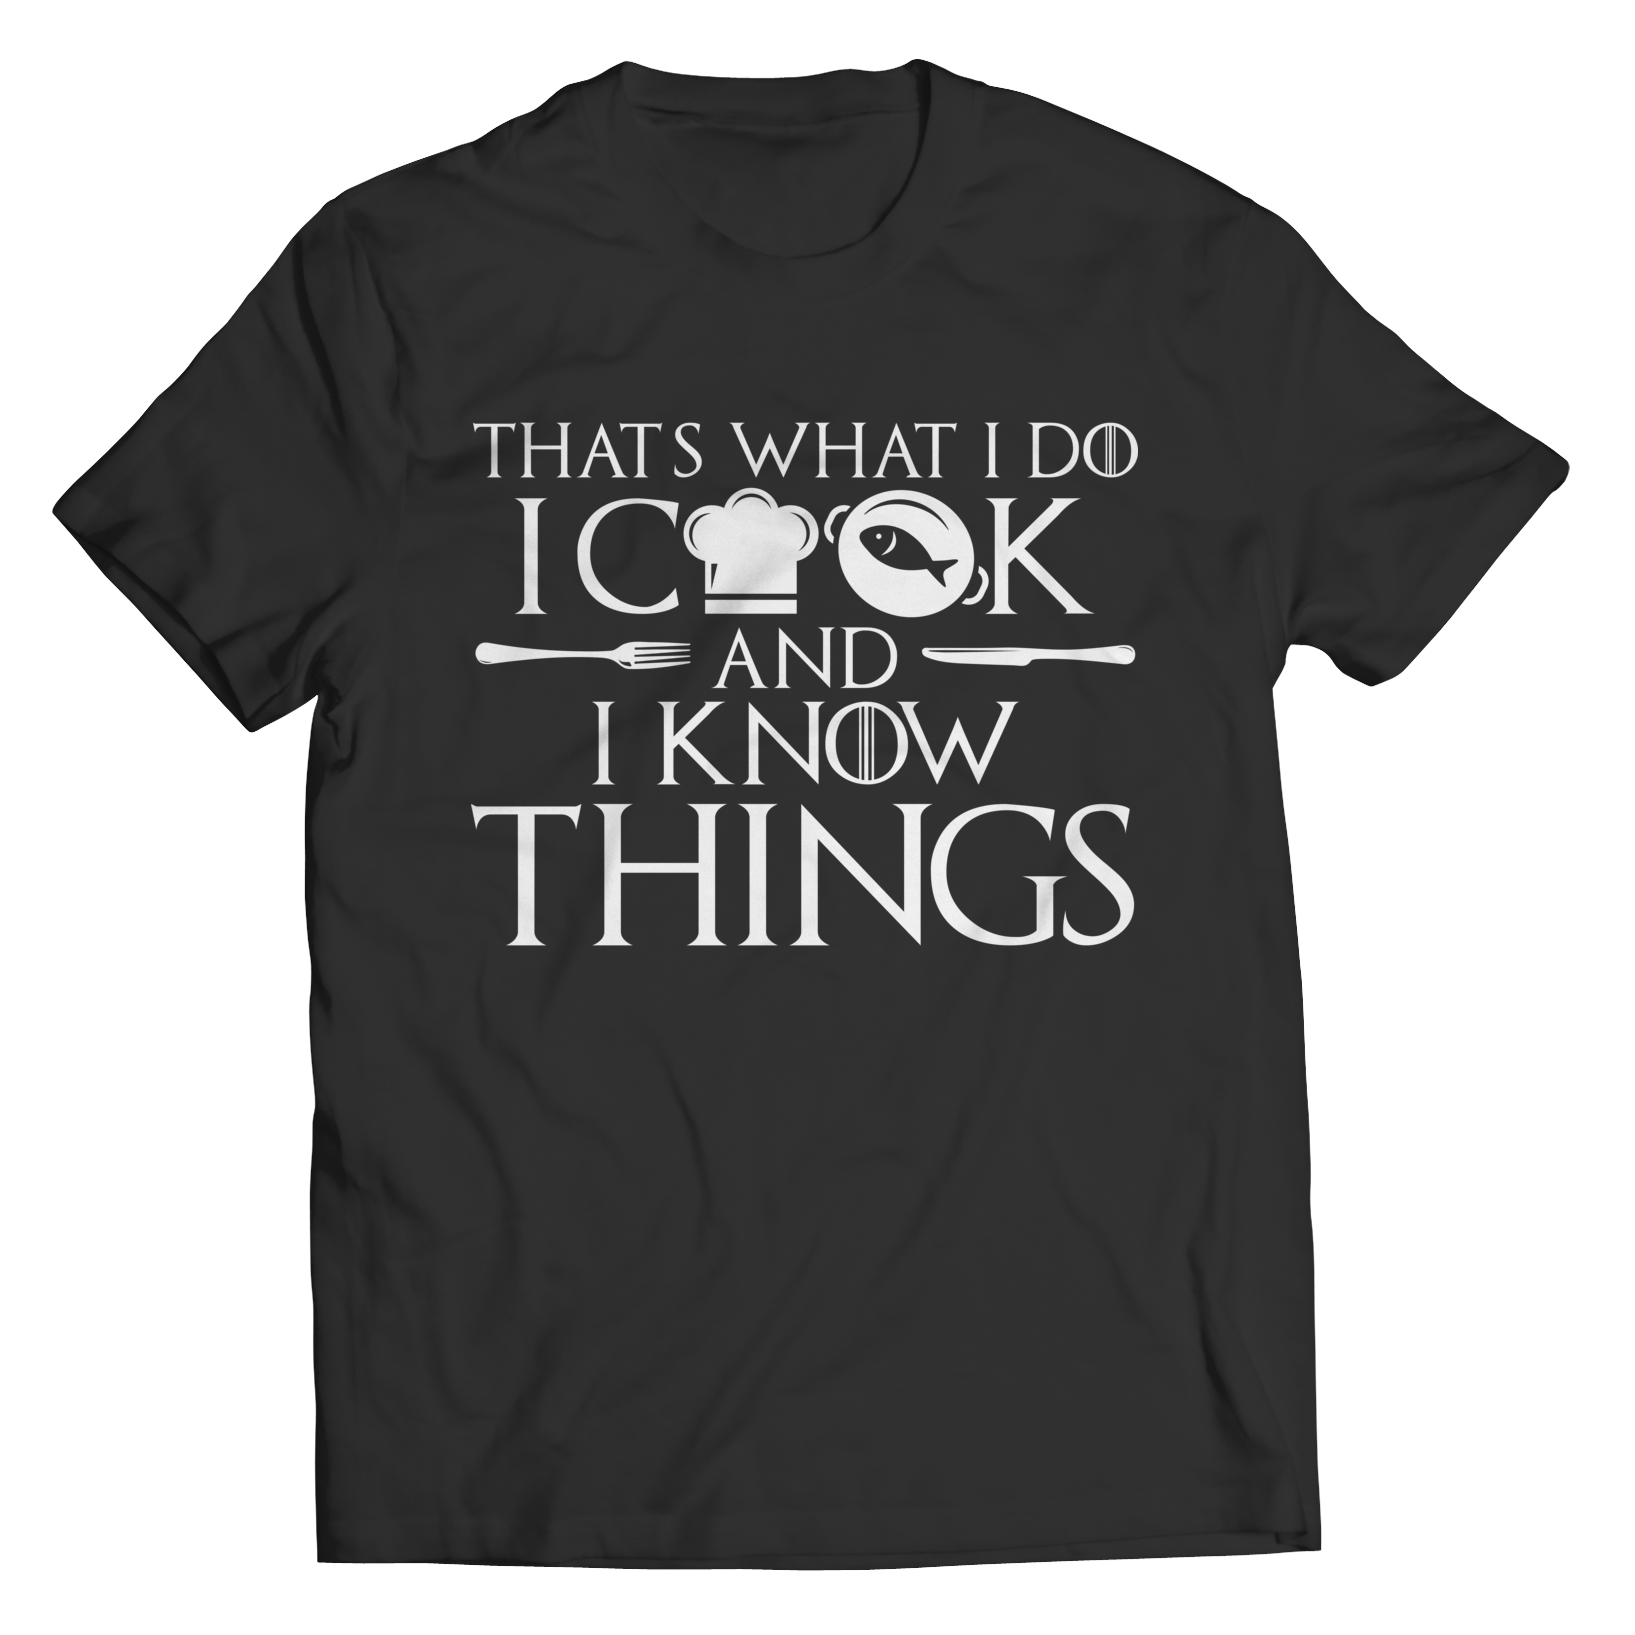 I Cook And I Know Things Unisex Tee Shirt